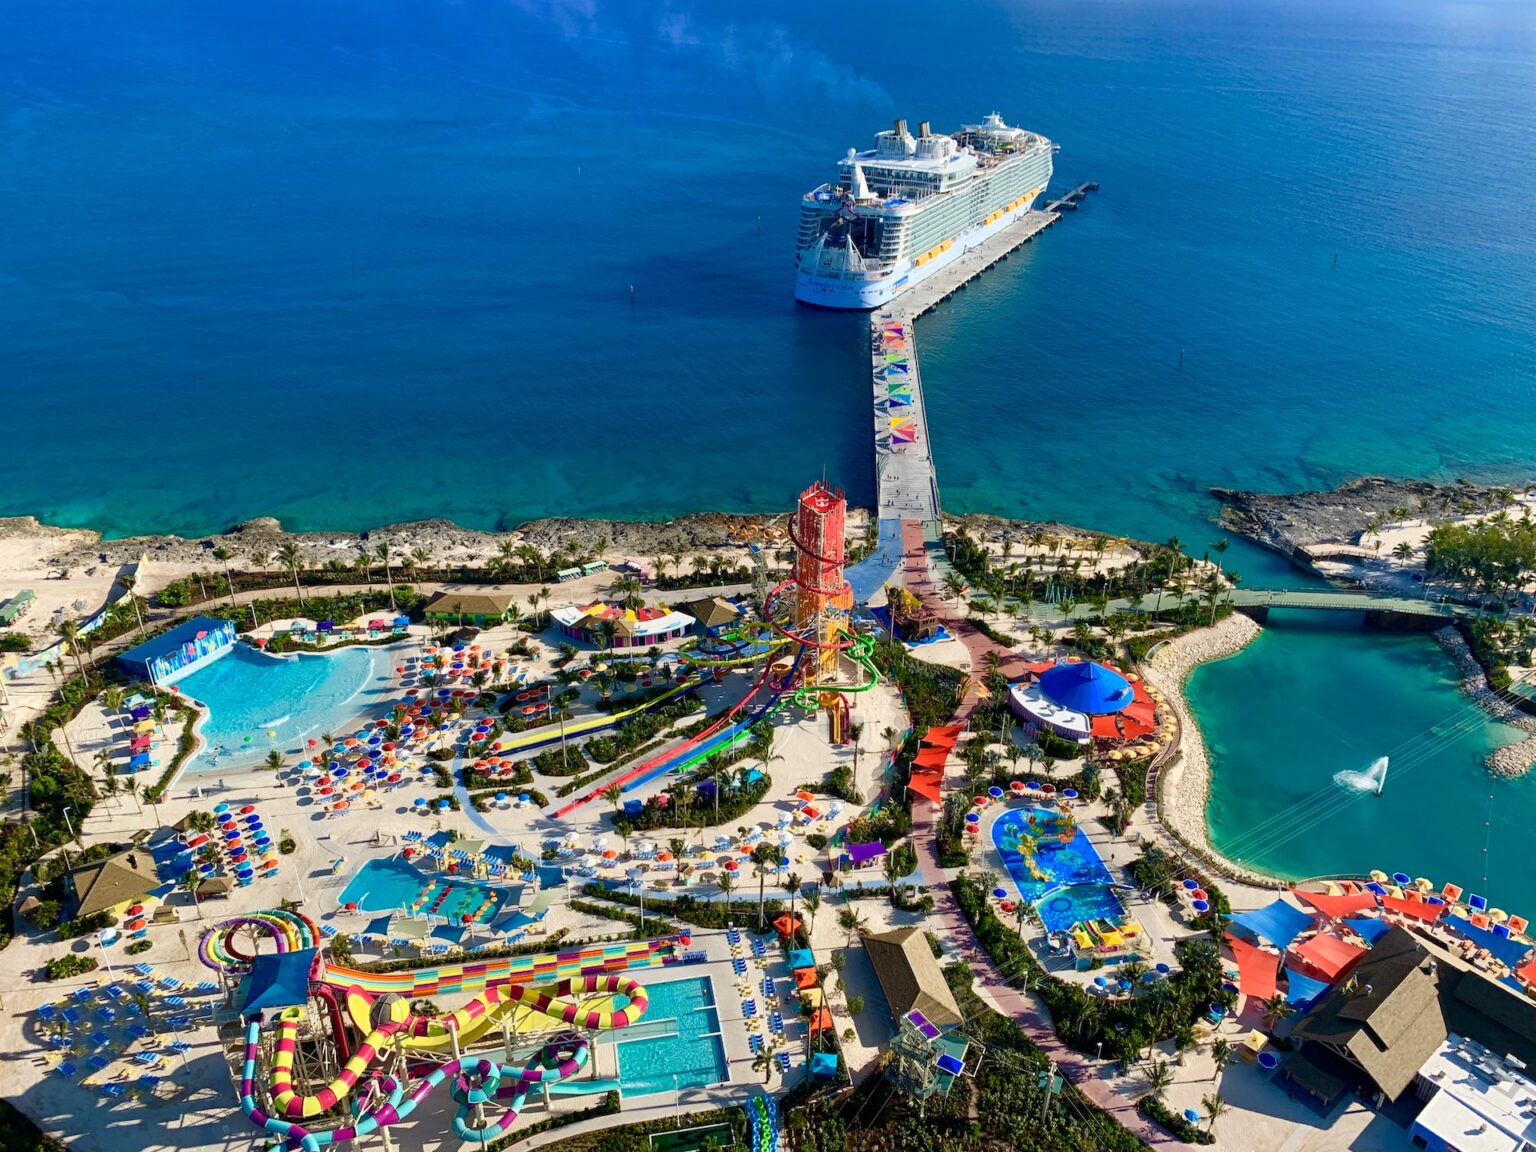 Enjoy your Vacation at the exhilirating Cococay beach in 2022- Part 1